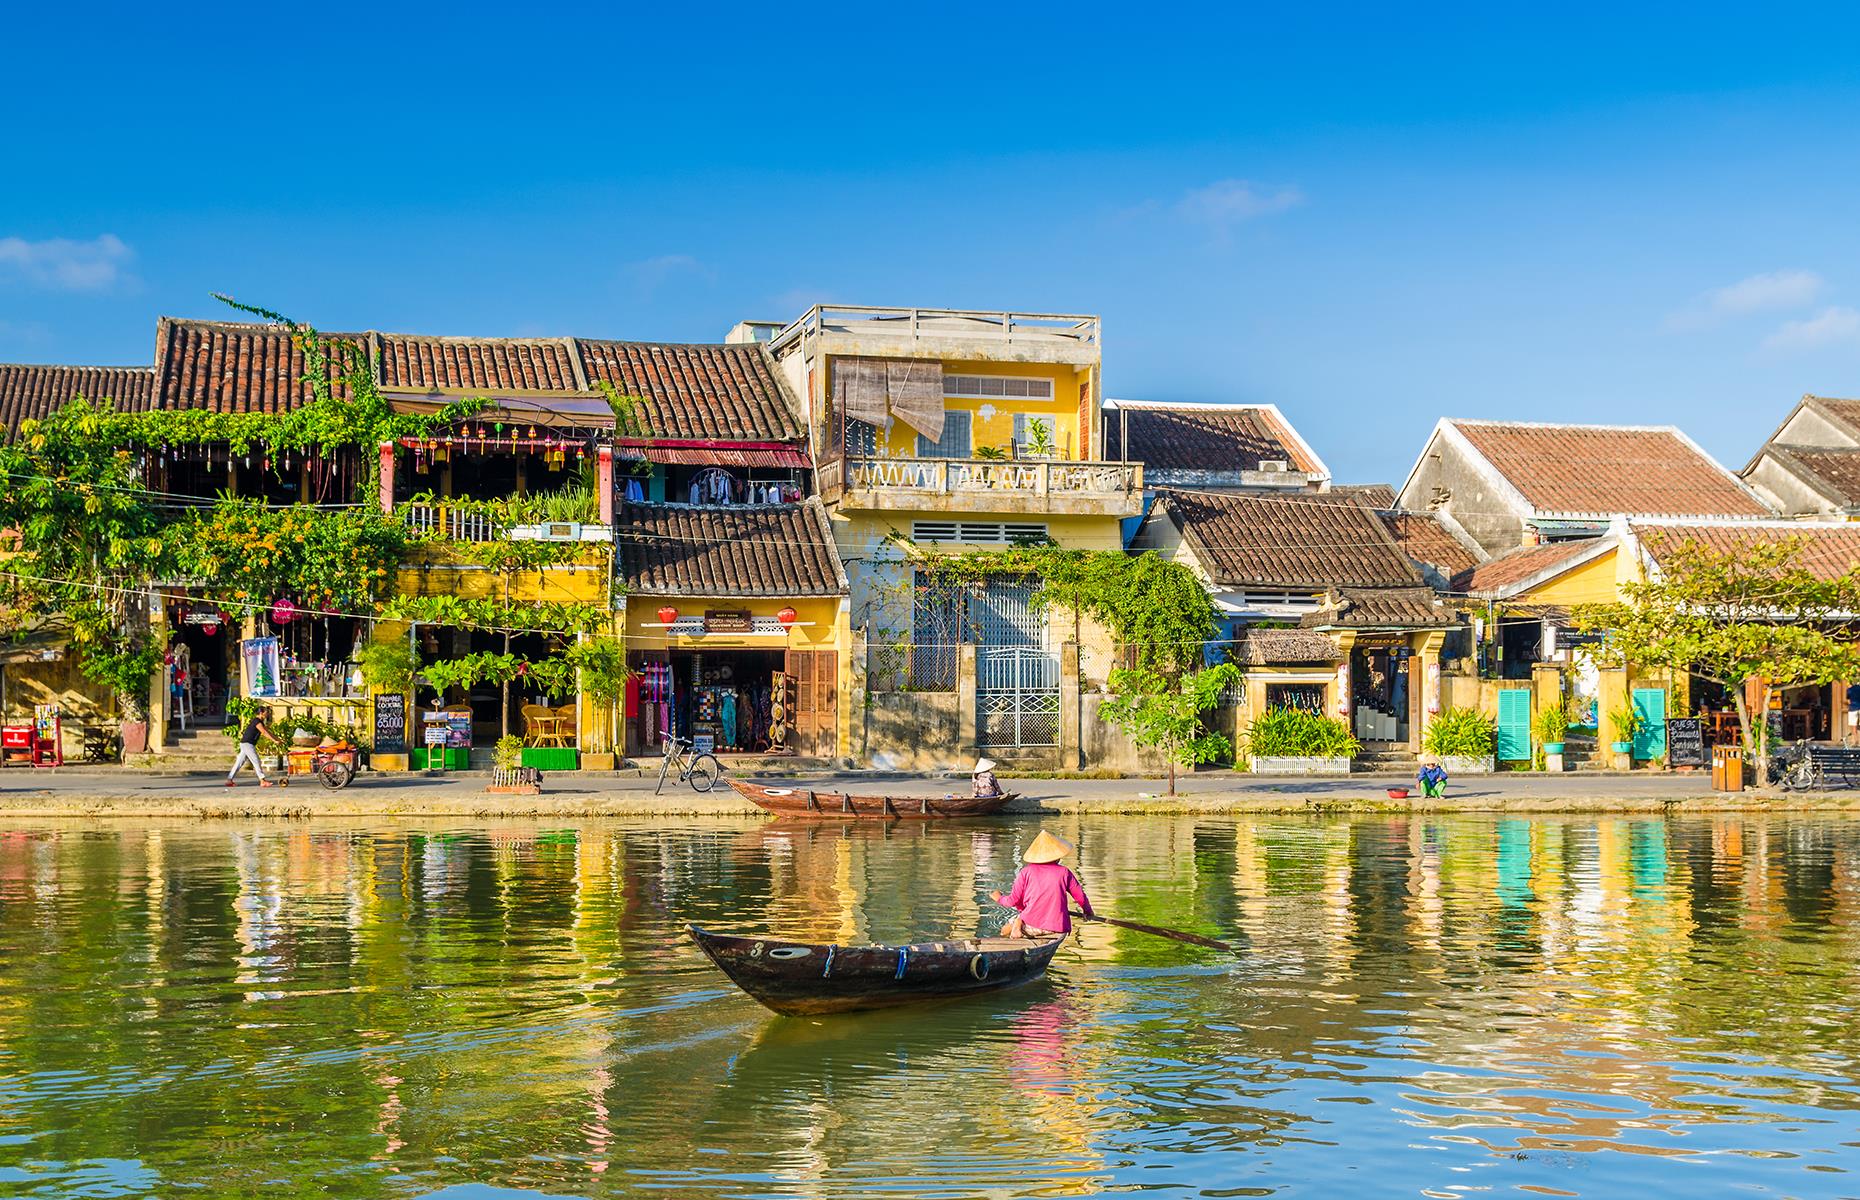 Da Nang is the gateway to explore historic Hoi An, which is around 19 miles away by taxi. Its well preserved old town is a truly delightful place to wander around, with grand old colonial architecture along pretty canals and ancient Chinese temples.